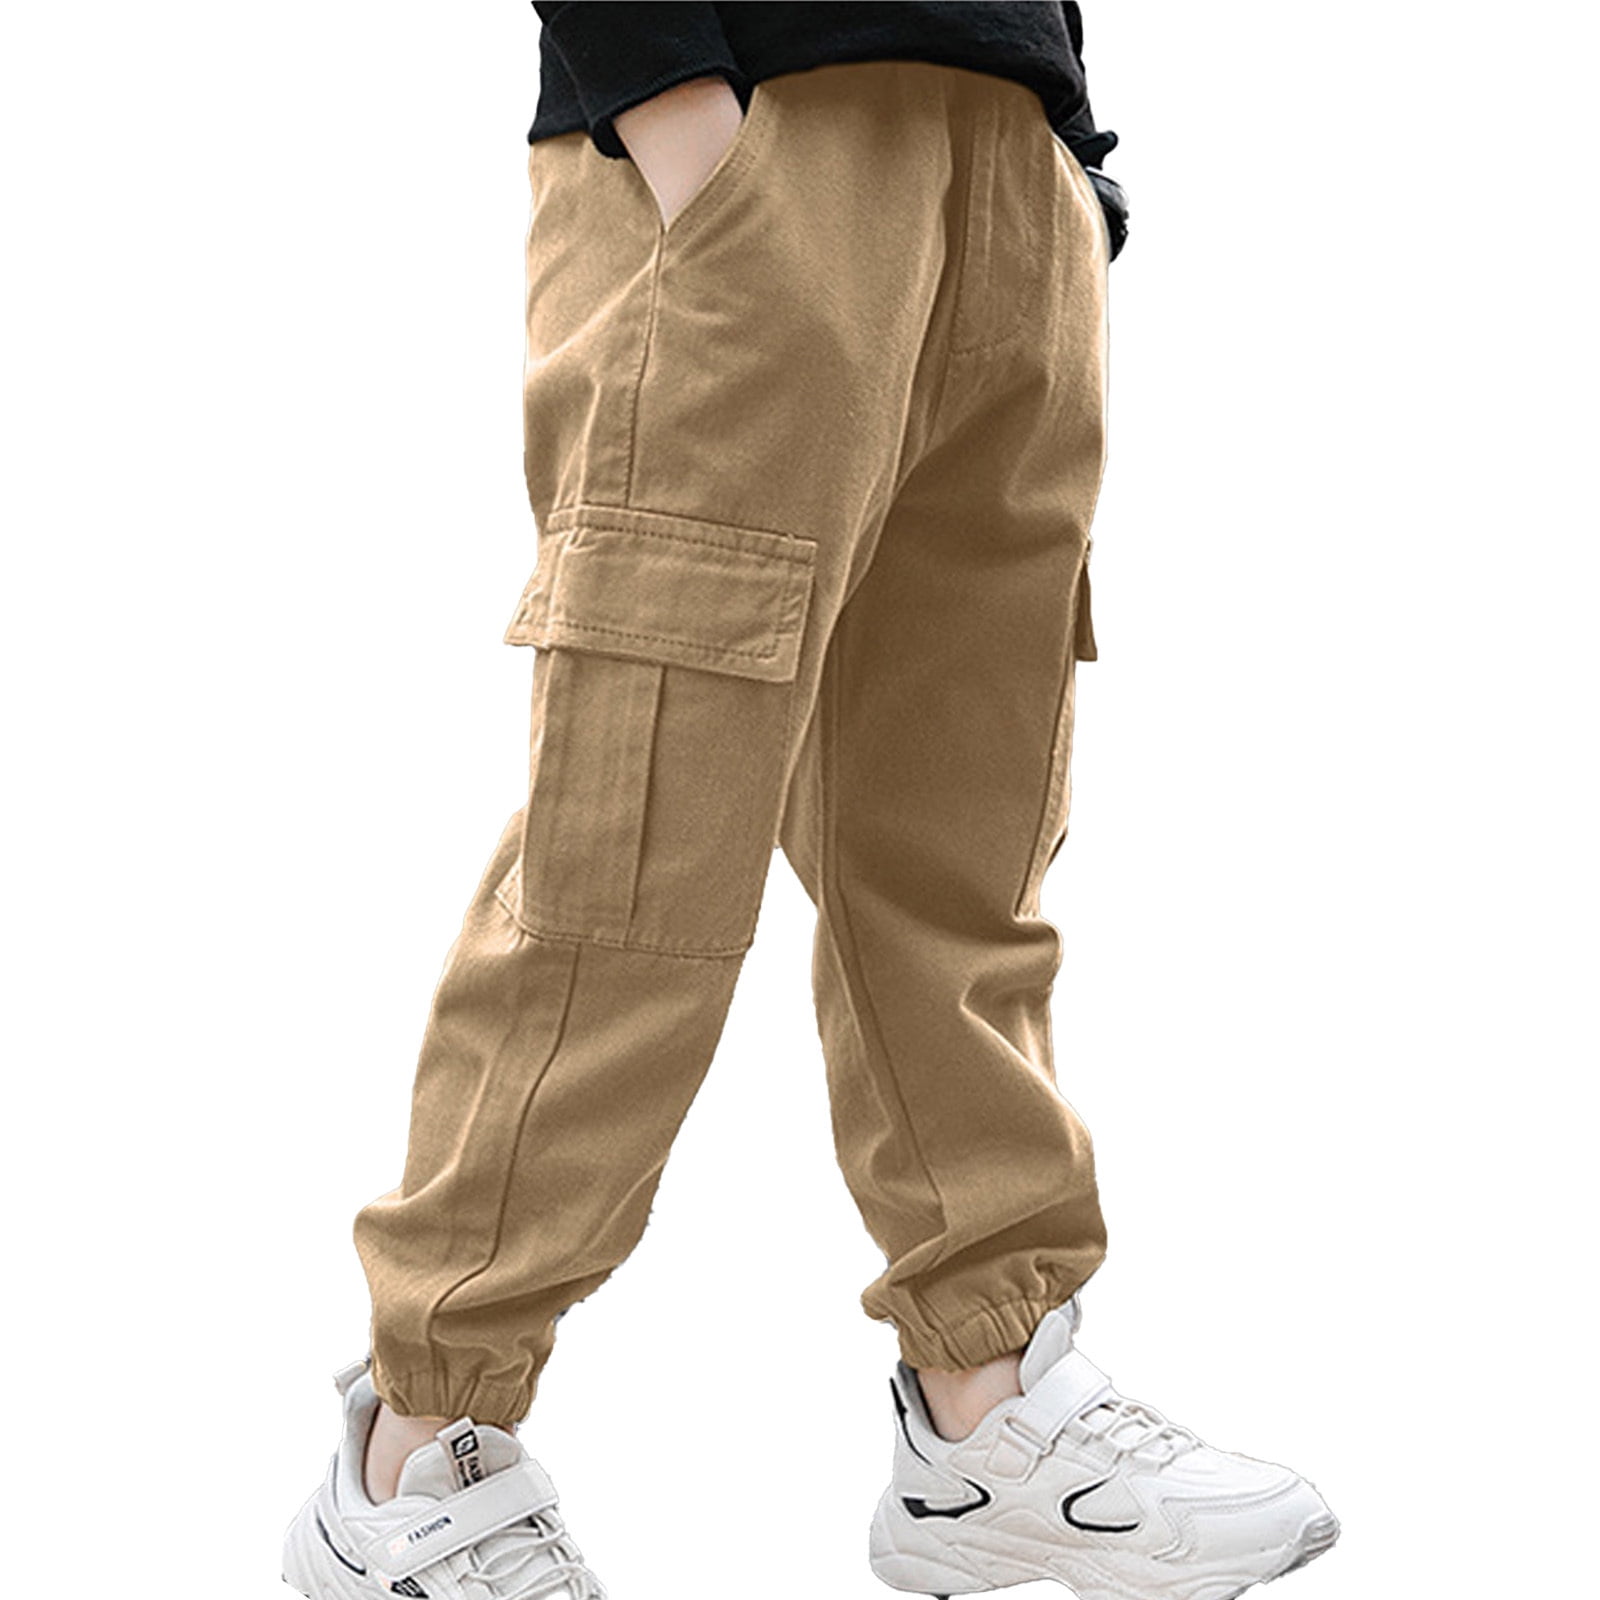 Boys Uniform Twill Woven Pull On Cargo Pants | The Children's Place - FLAX